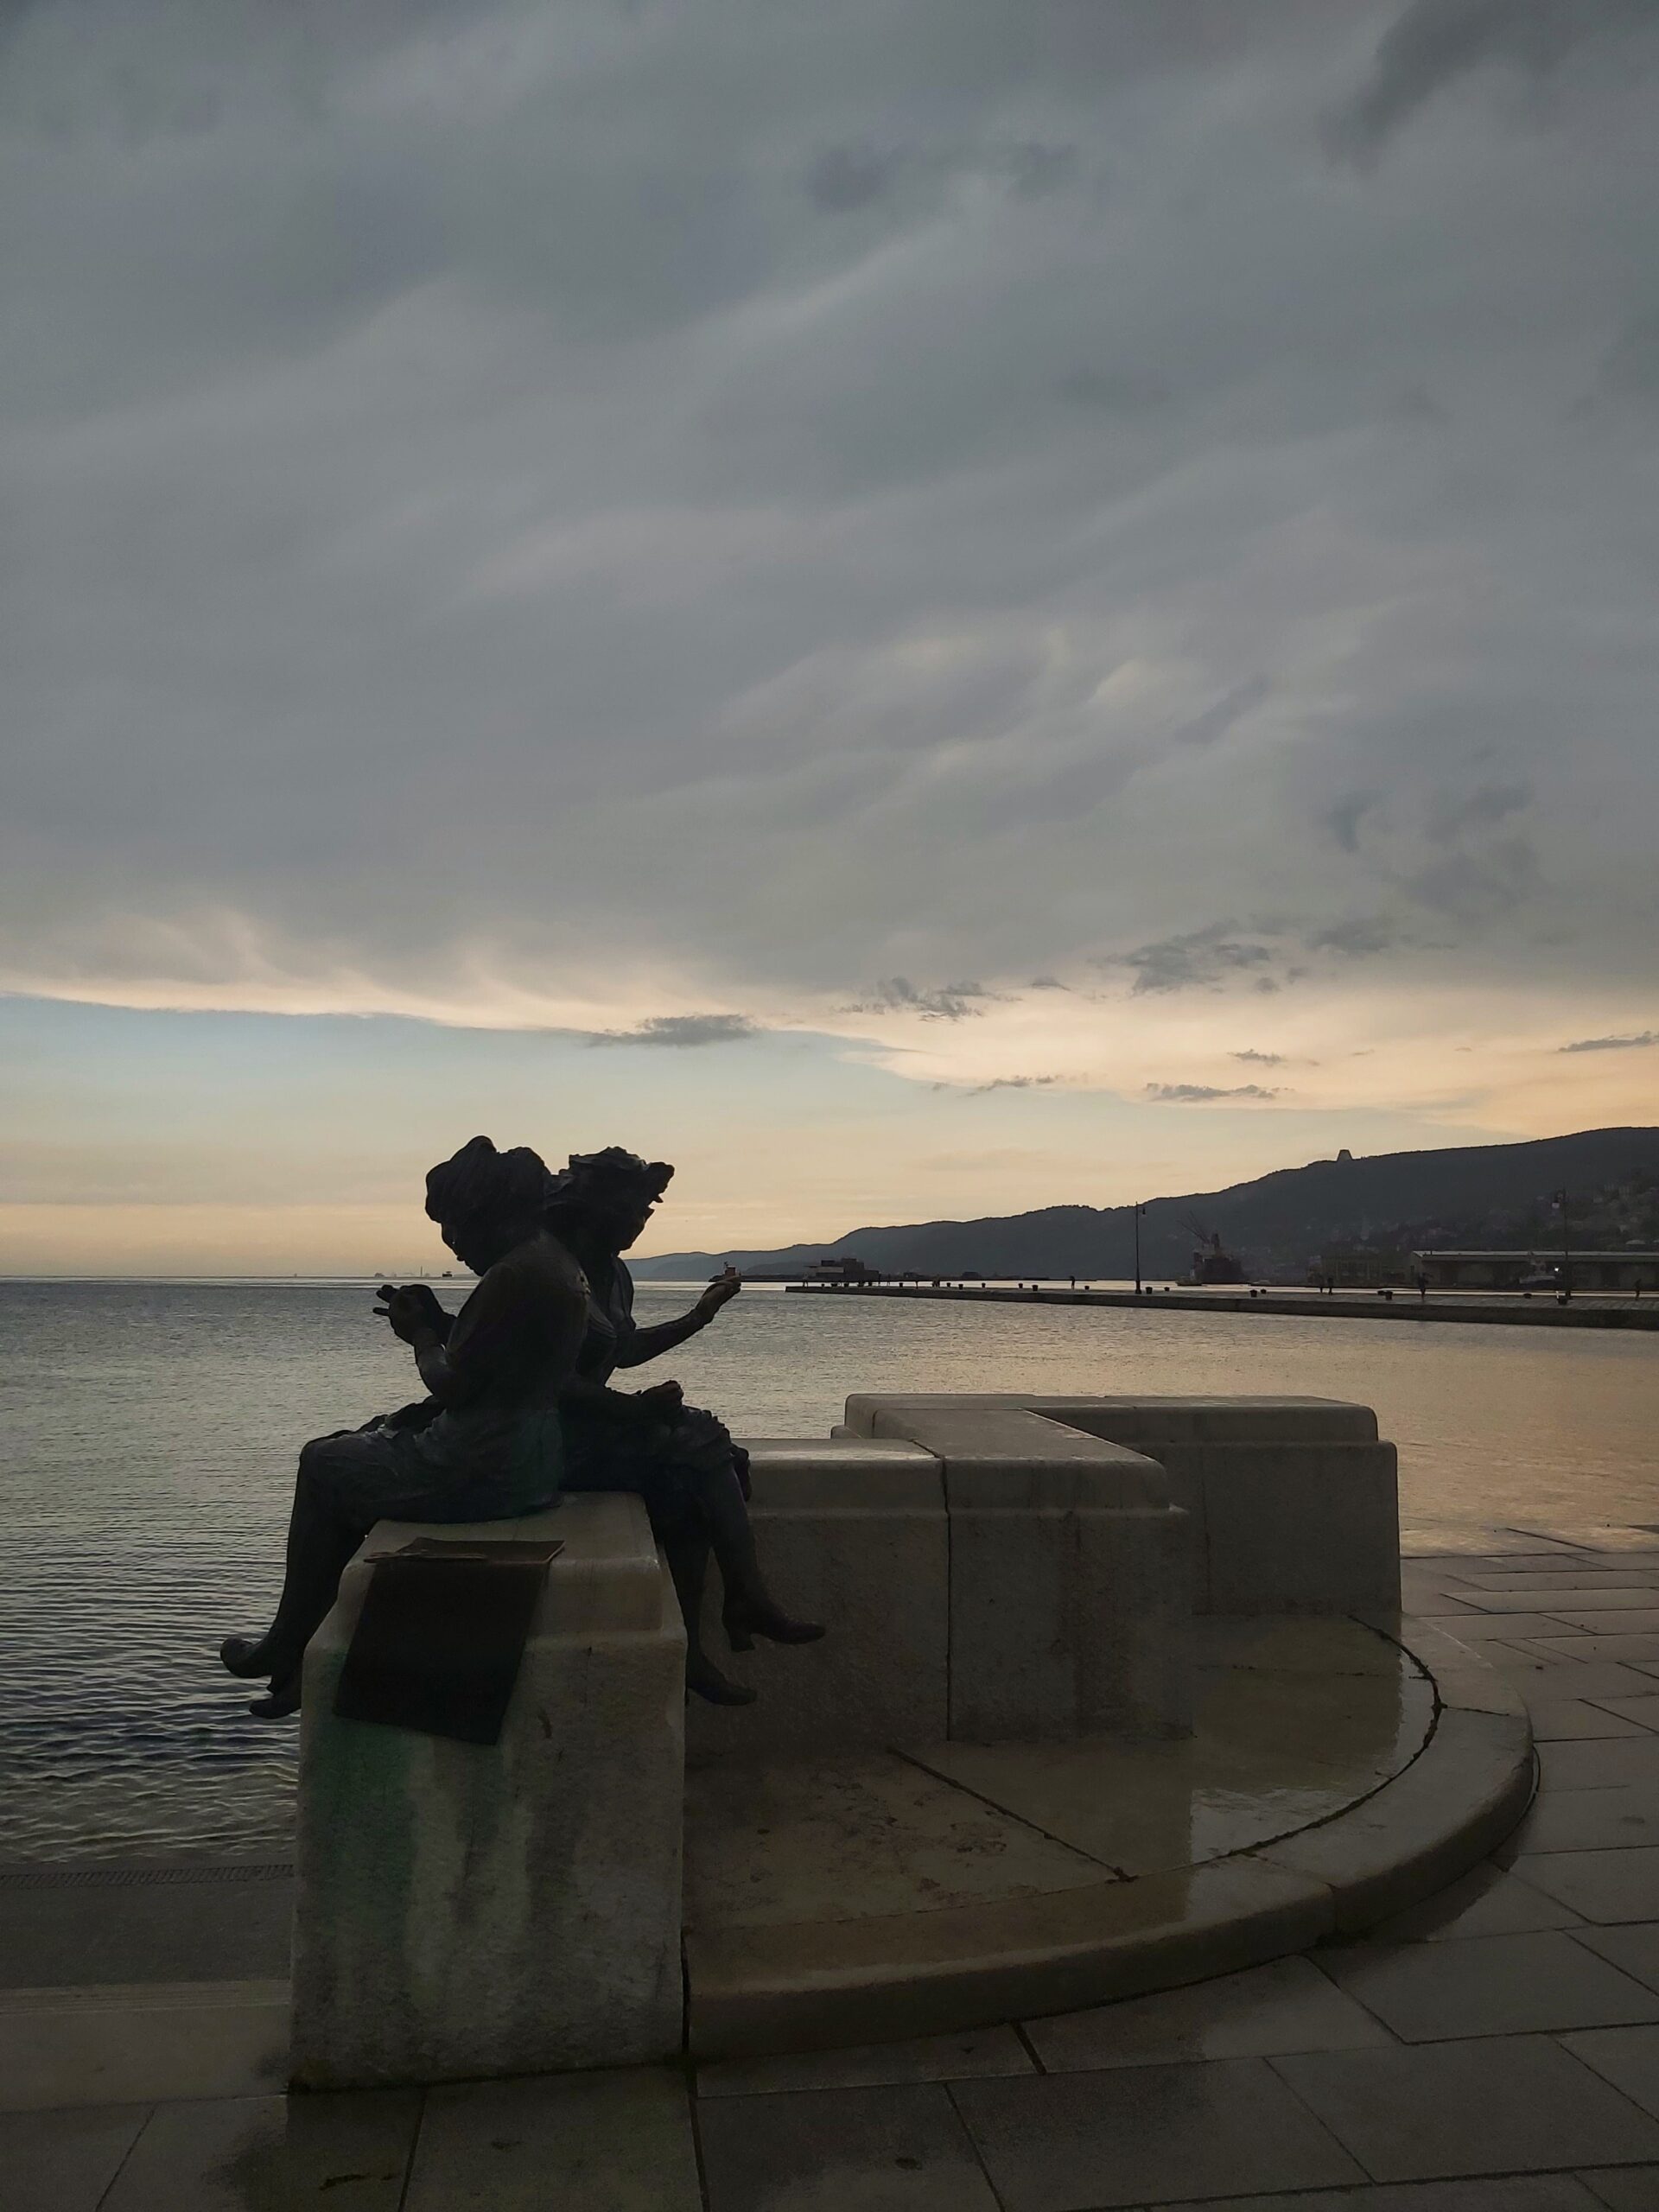 A statue of two women sewing, "Le Ragazze di Trieste", by the harbour in Trieste, Italy